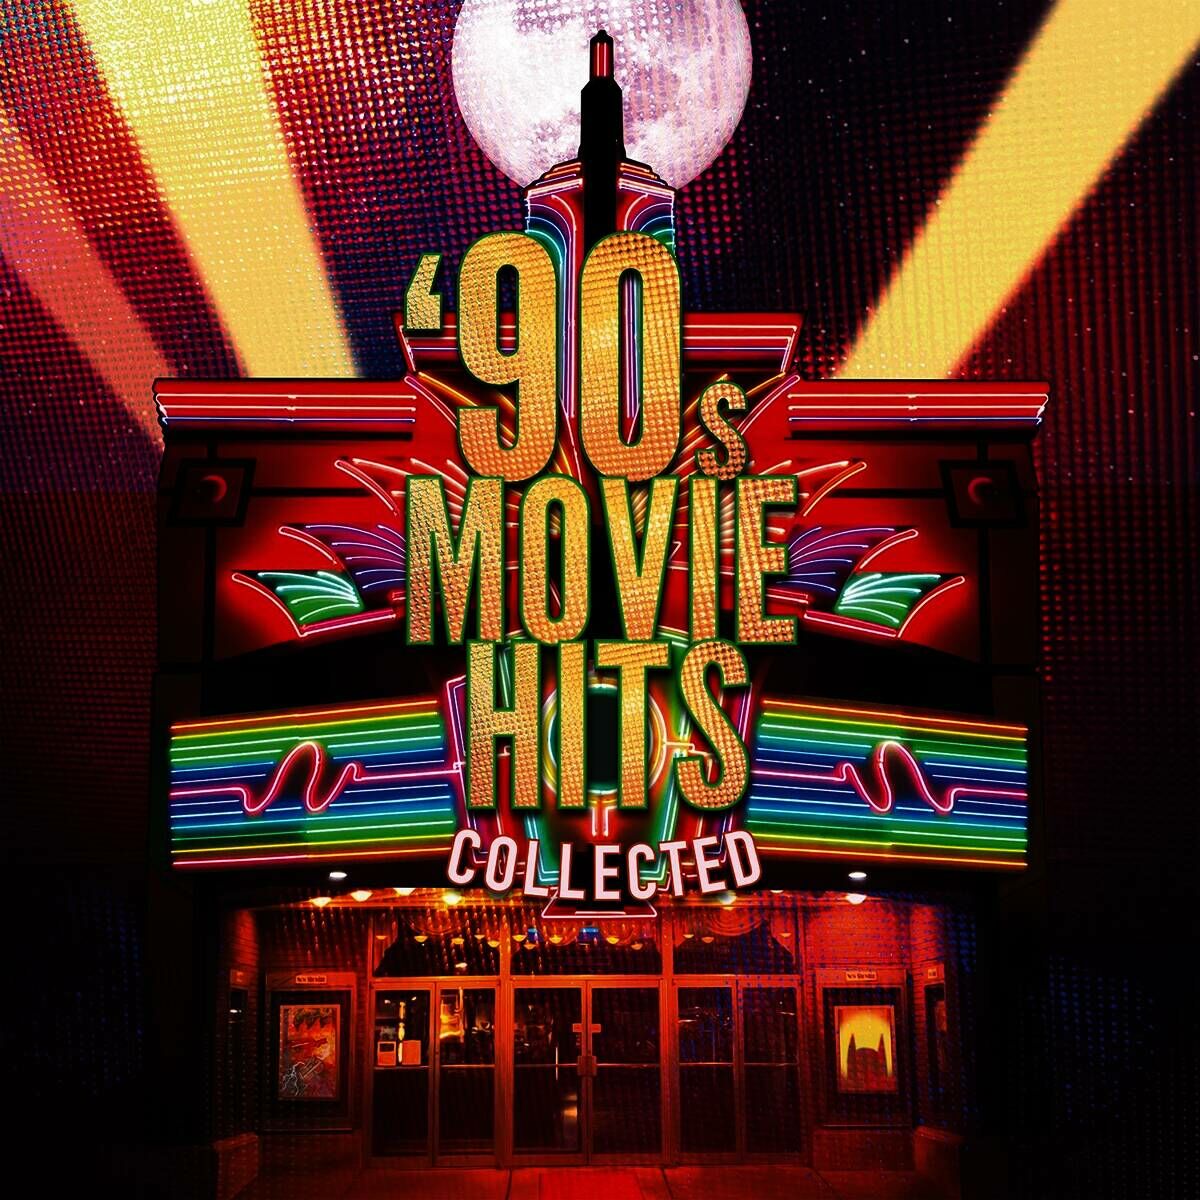 Various - '90s Movie Hits Collected